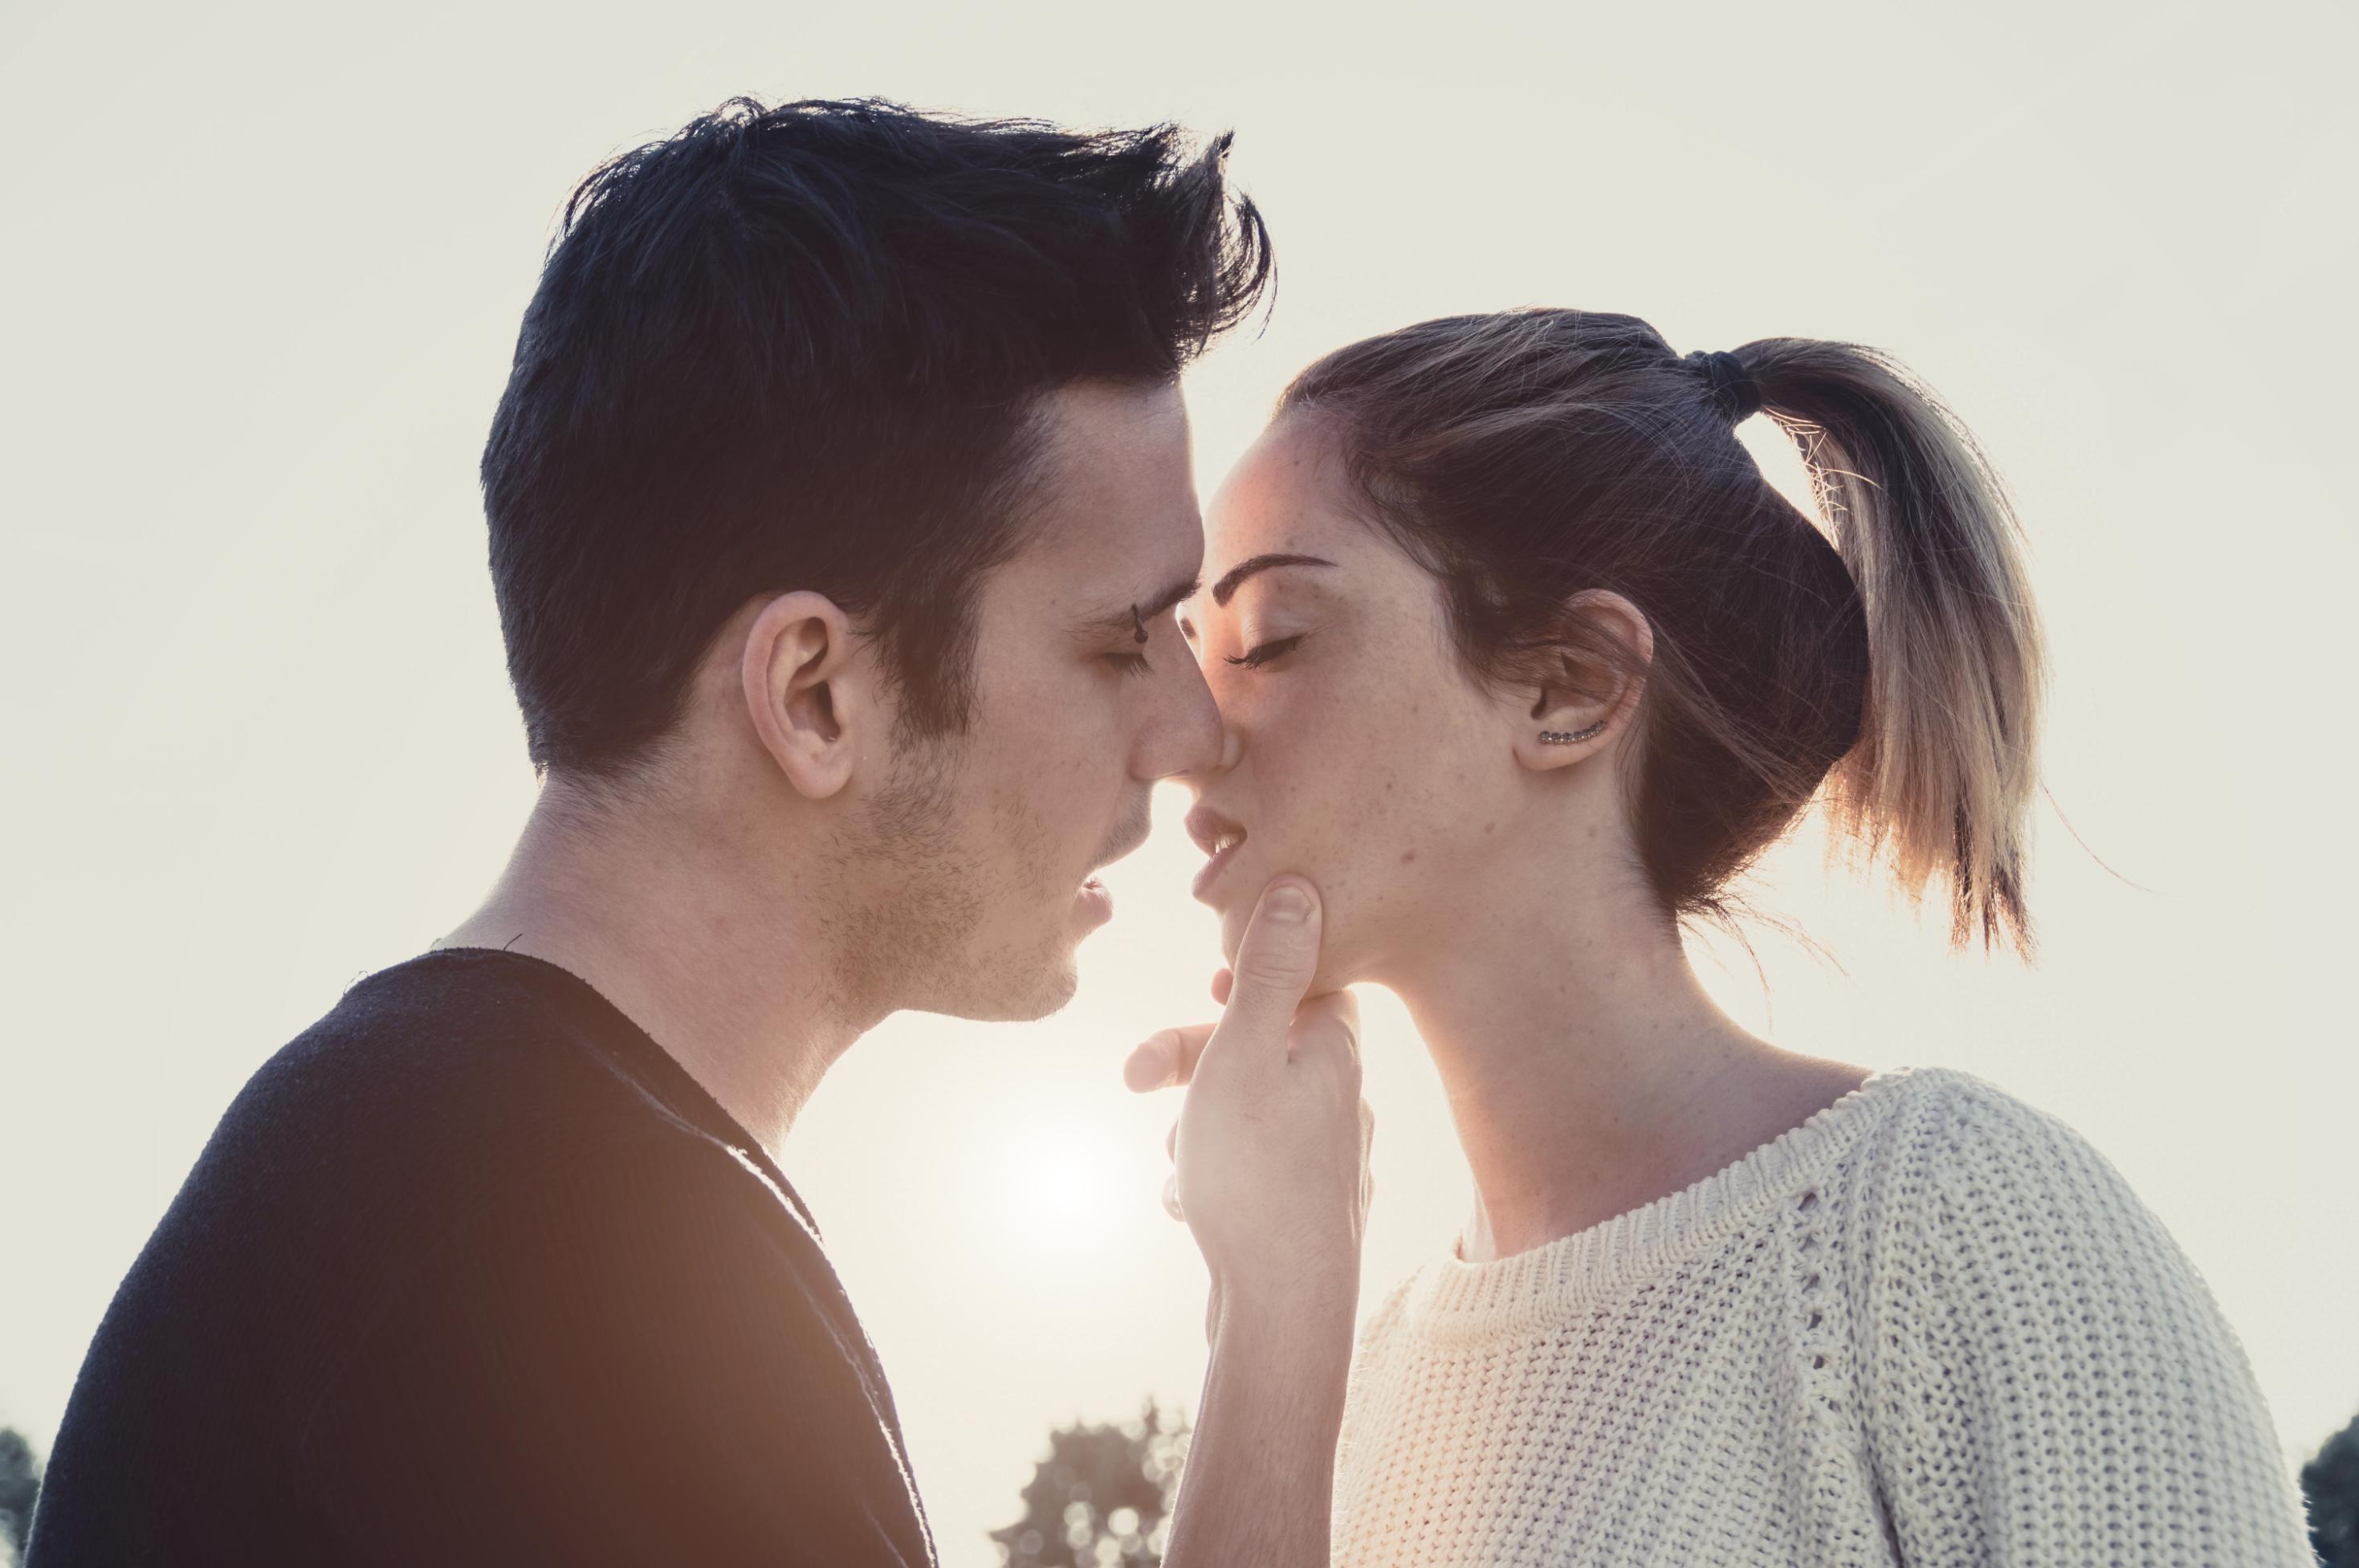 Kissing for long people time a french French Etiquette: